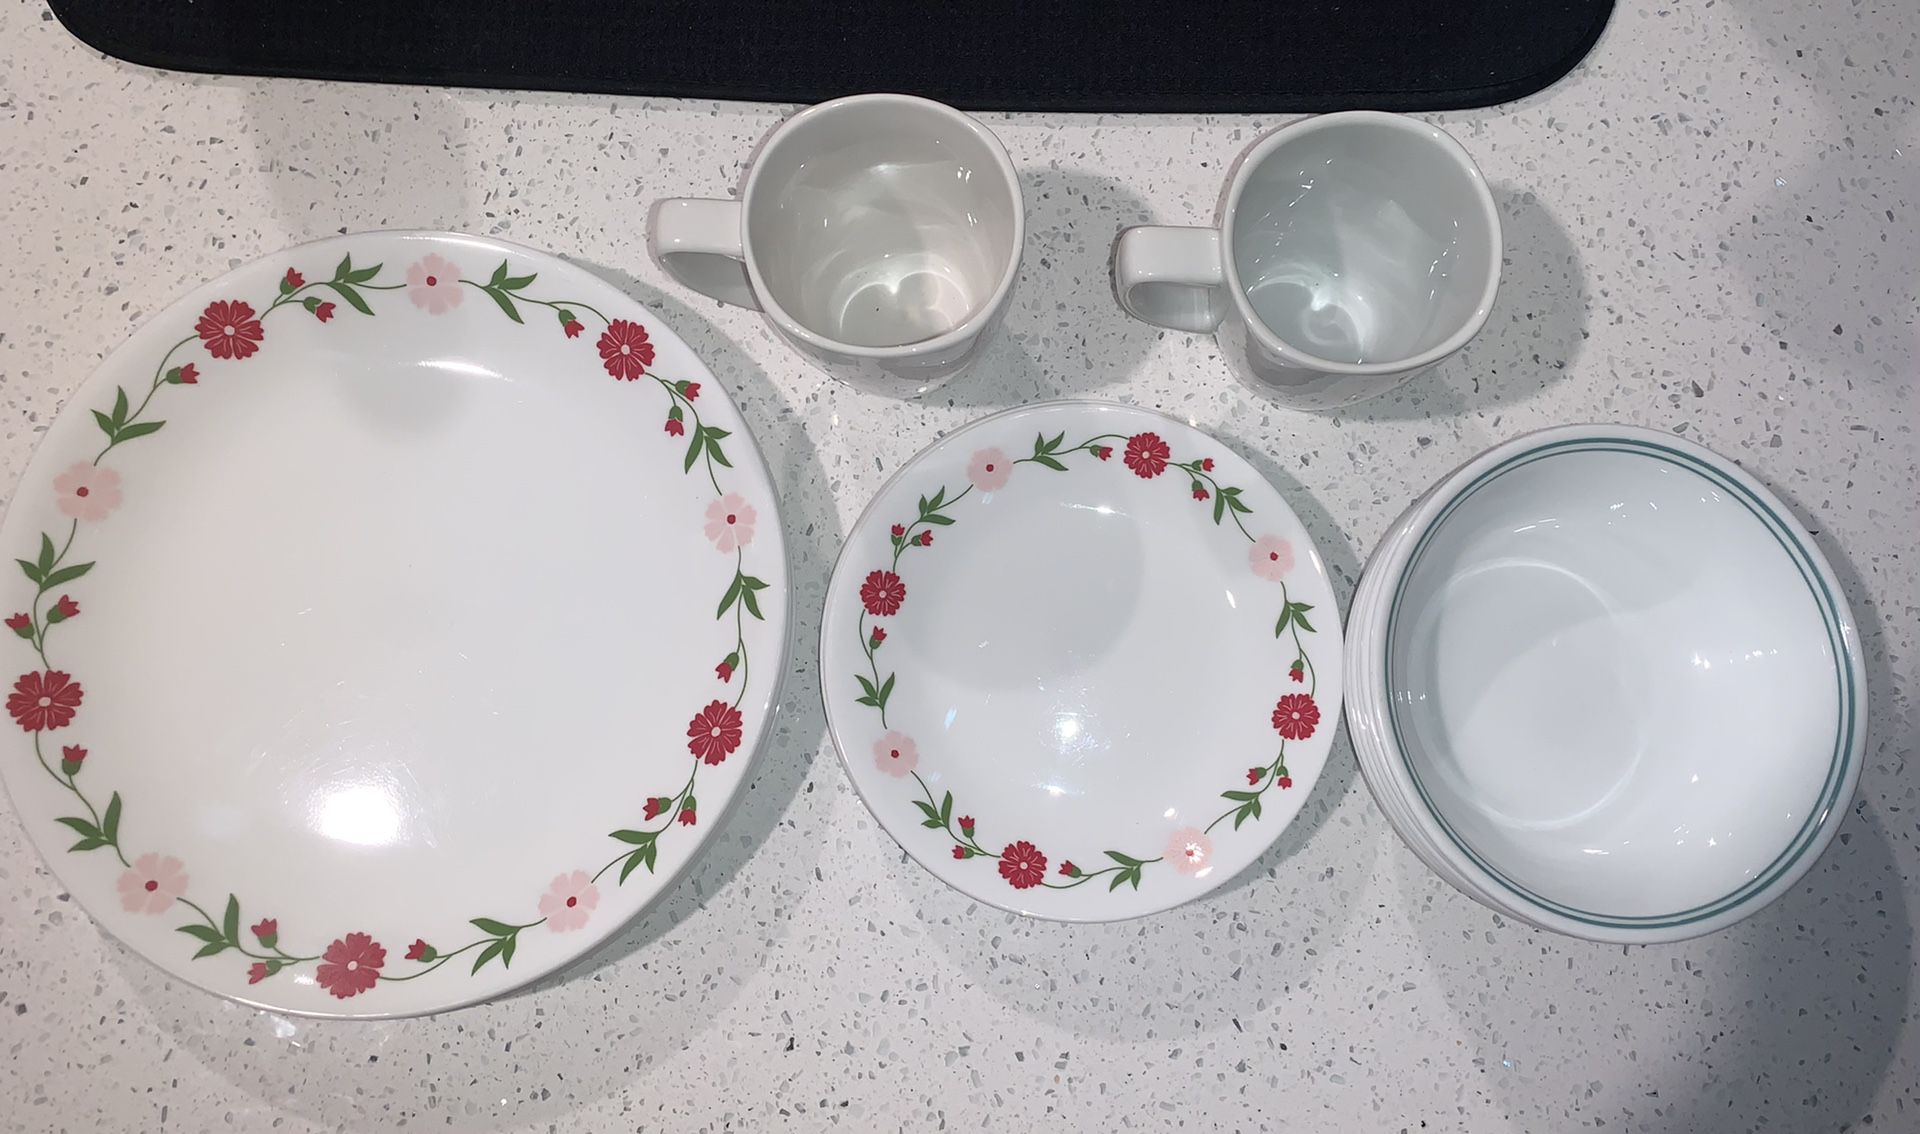 21 pieces of Corelle Spring Pink Dinnerware by Corning